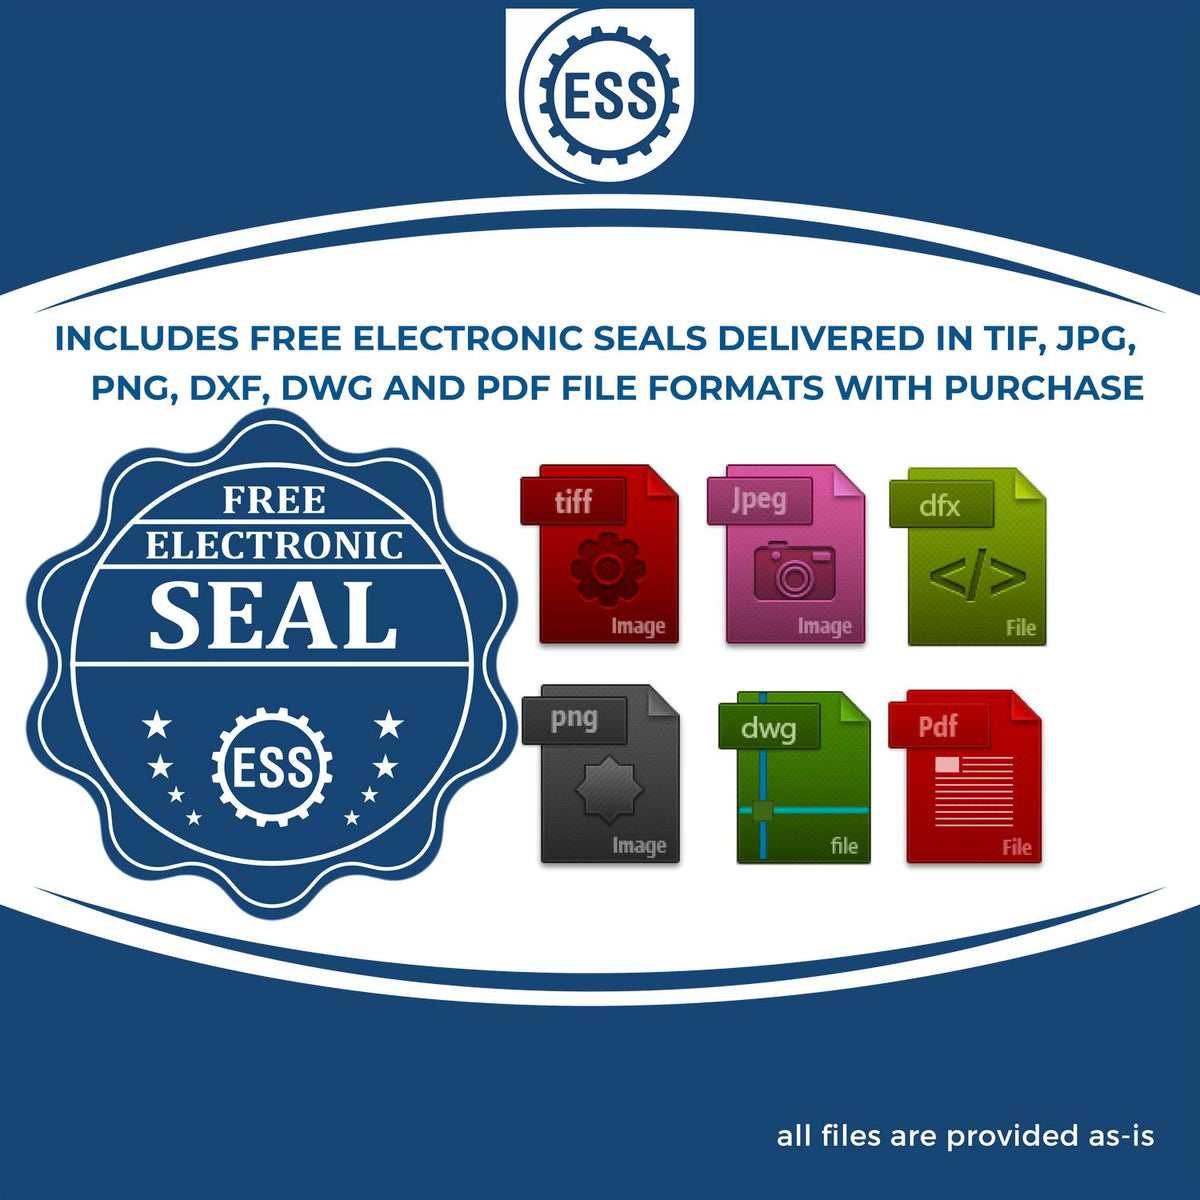 An infographic for the free electronic seal for the Gift Washington Engineer Seal illustrating the different file type icons such as DXF, DWG, TIF, JPG and PNG.